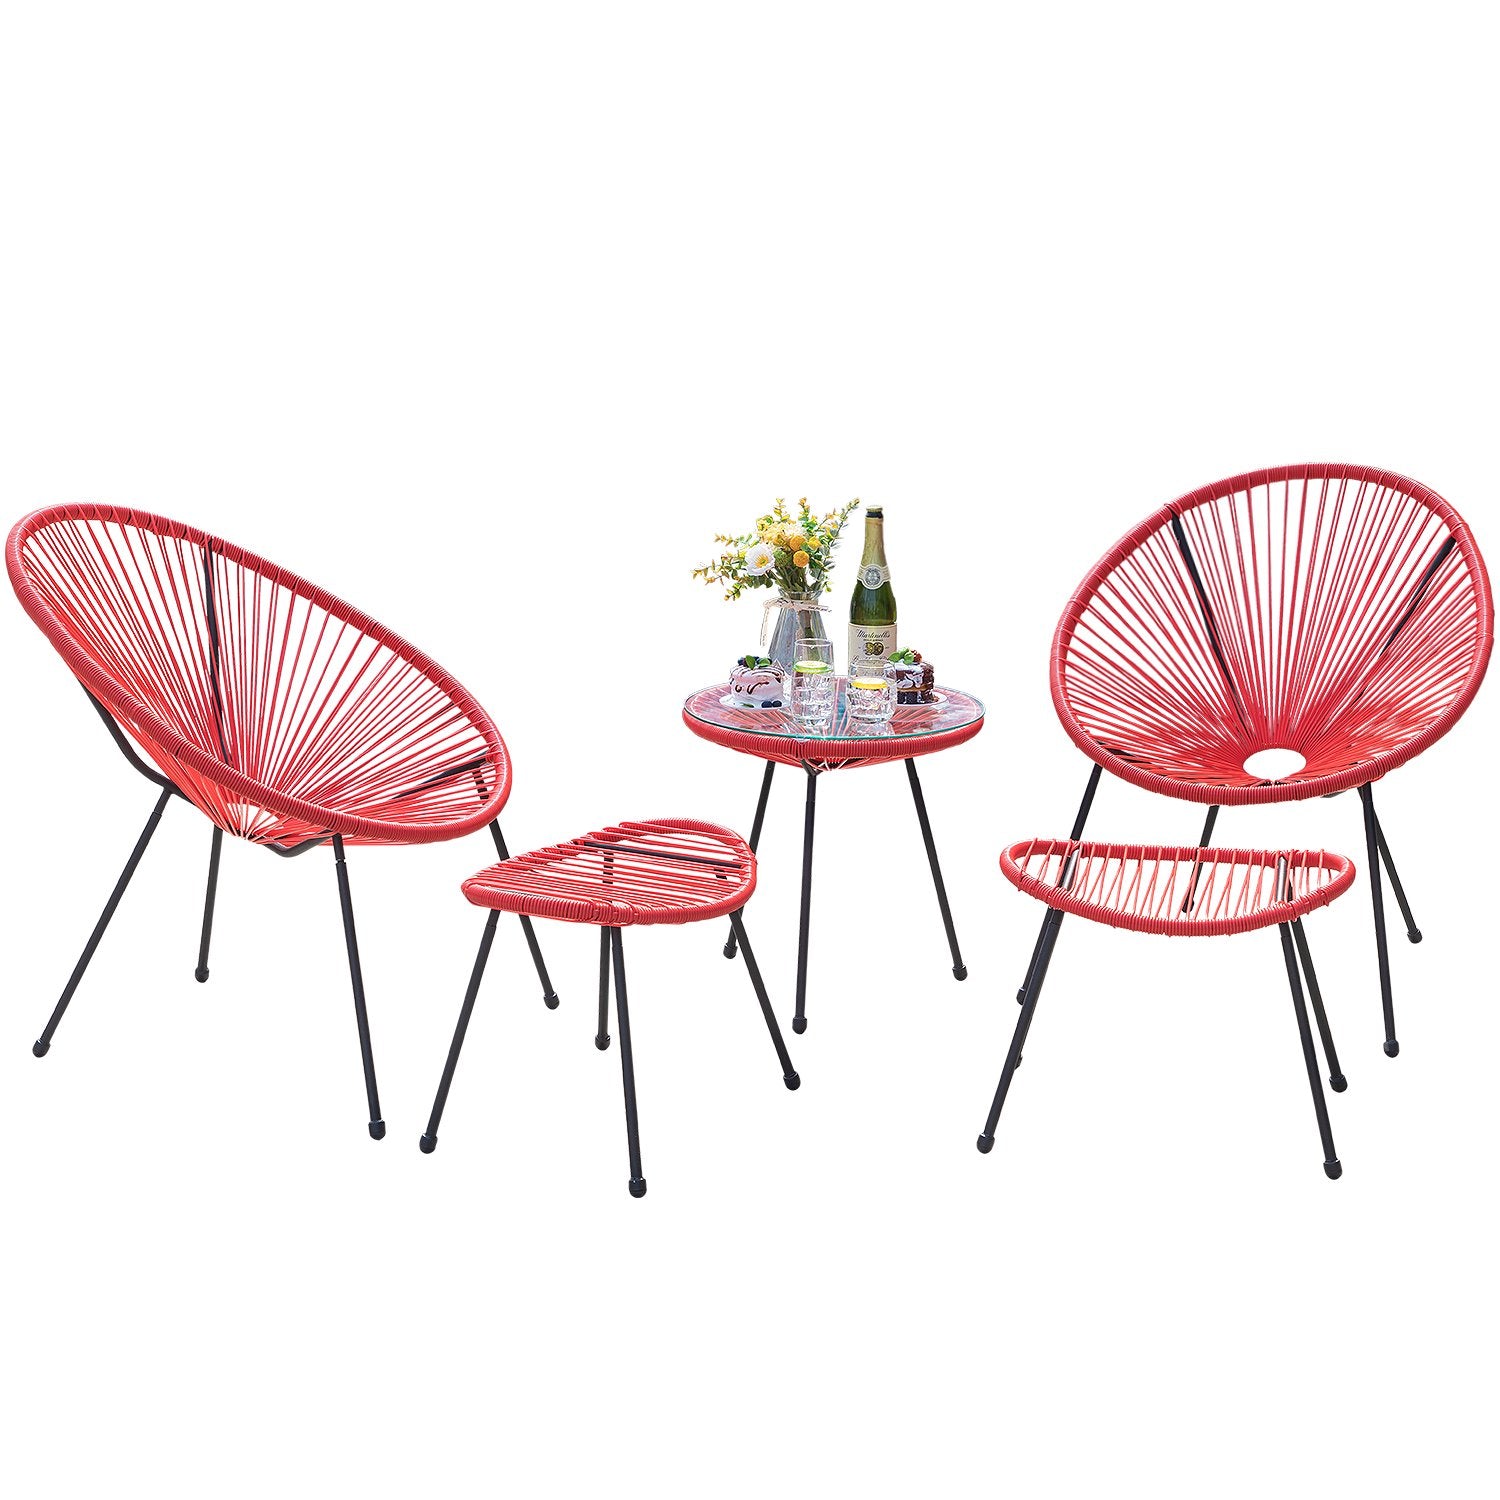 Intra Outdoor Patio Seating Set 2 Chairs 2 Ottoman and Table Set (Red)